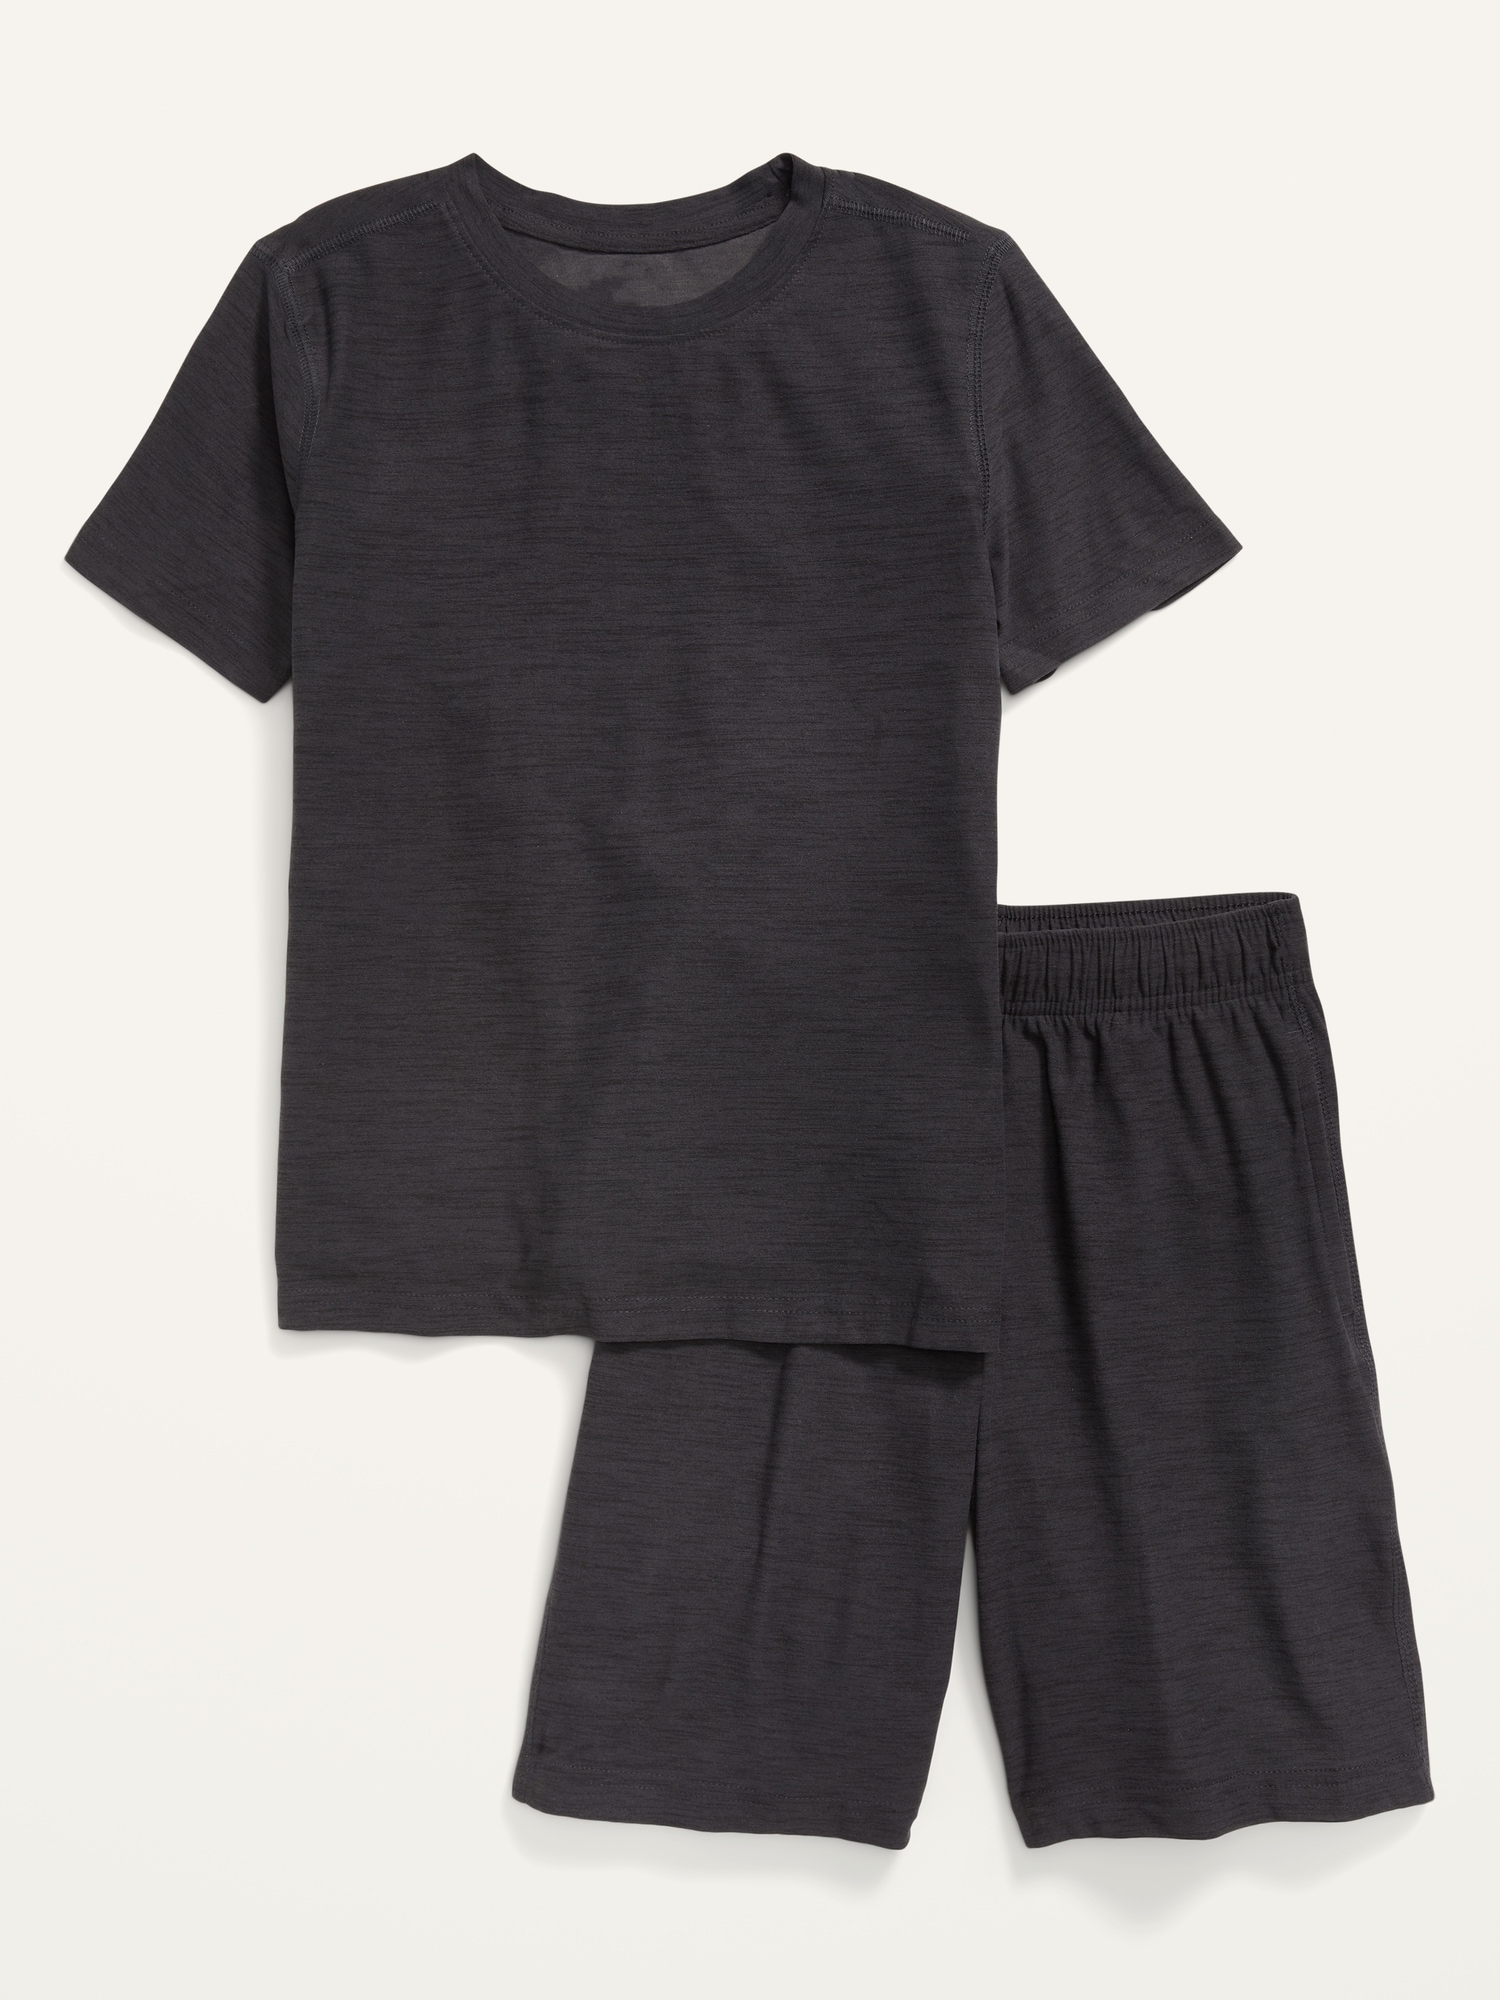 Old Navy Breathe On Tee And Shorts Set For Boys black. 1